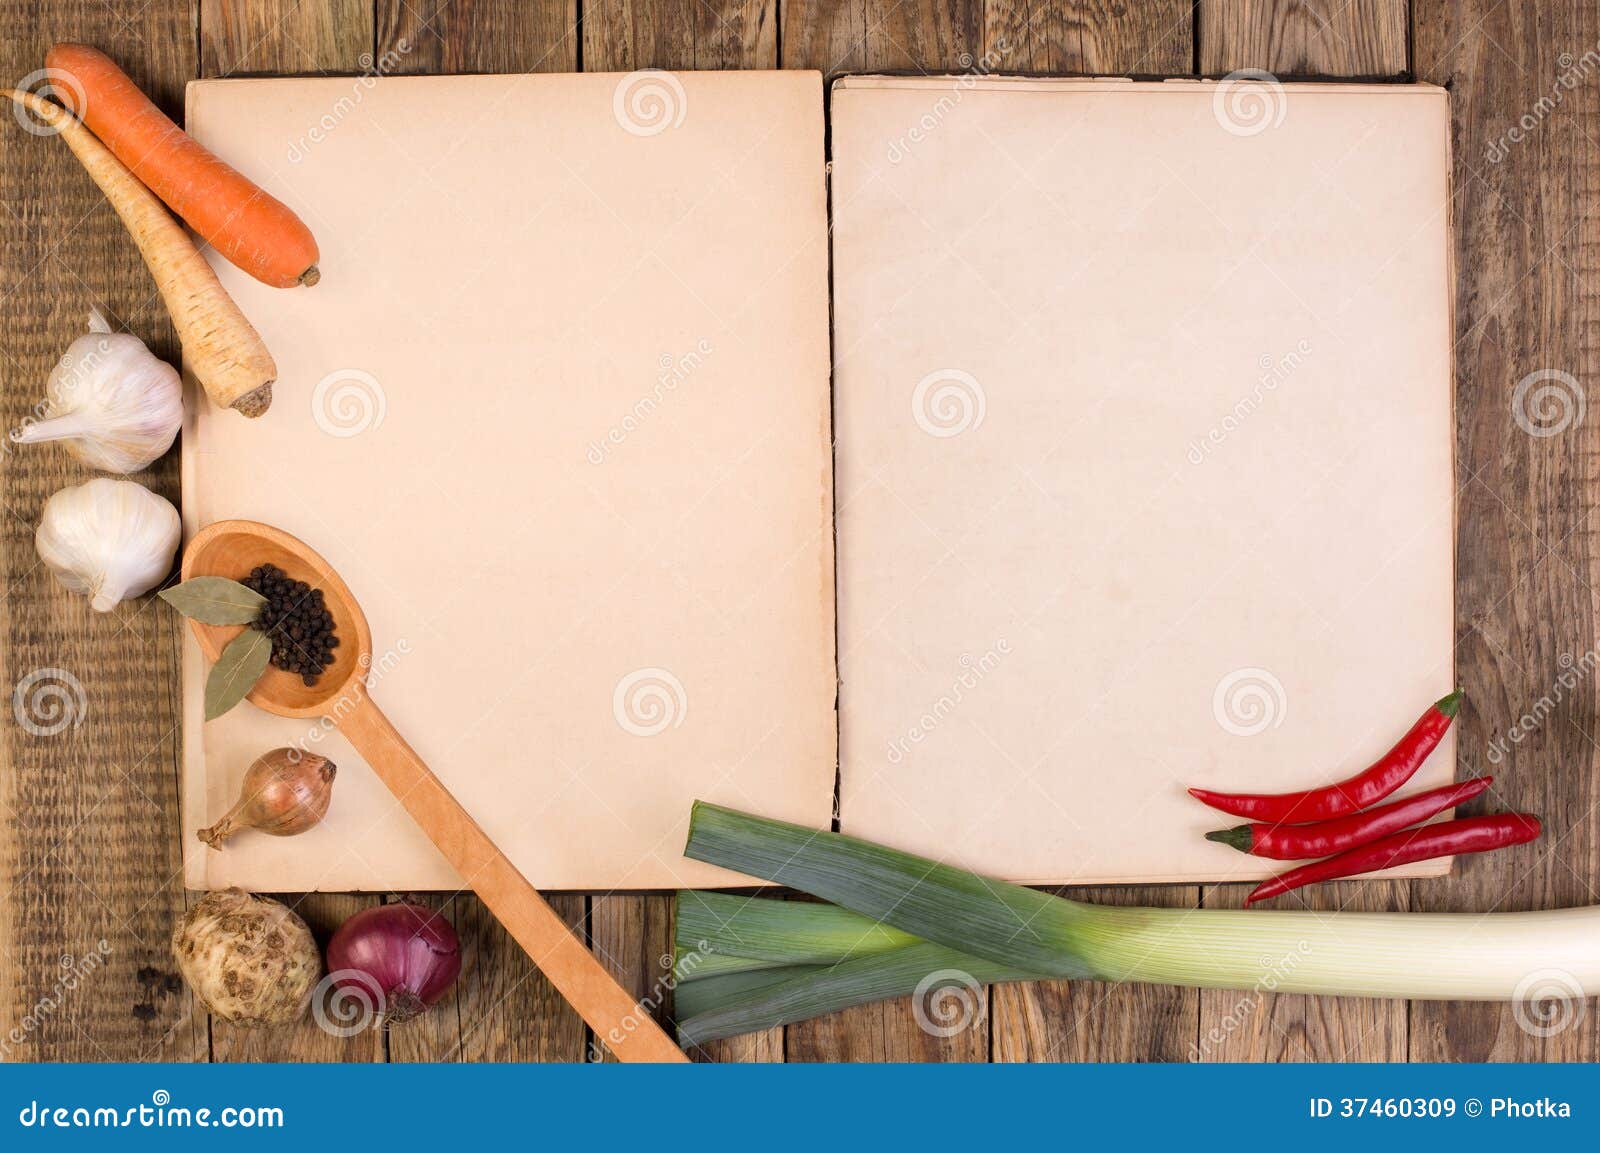 cookery book on wooden background